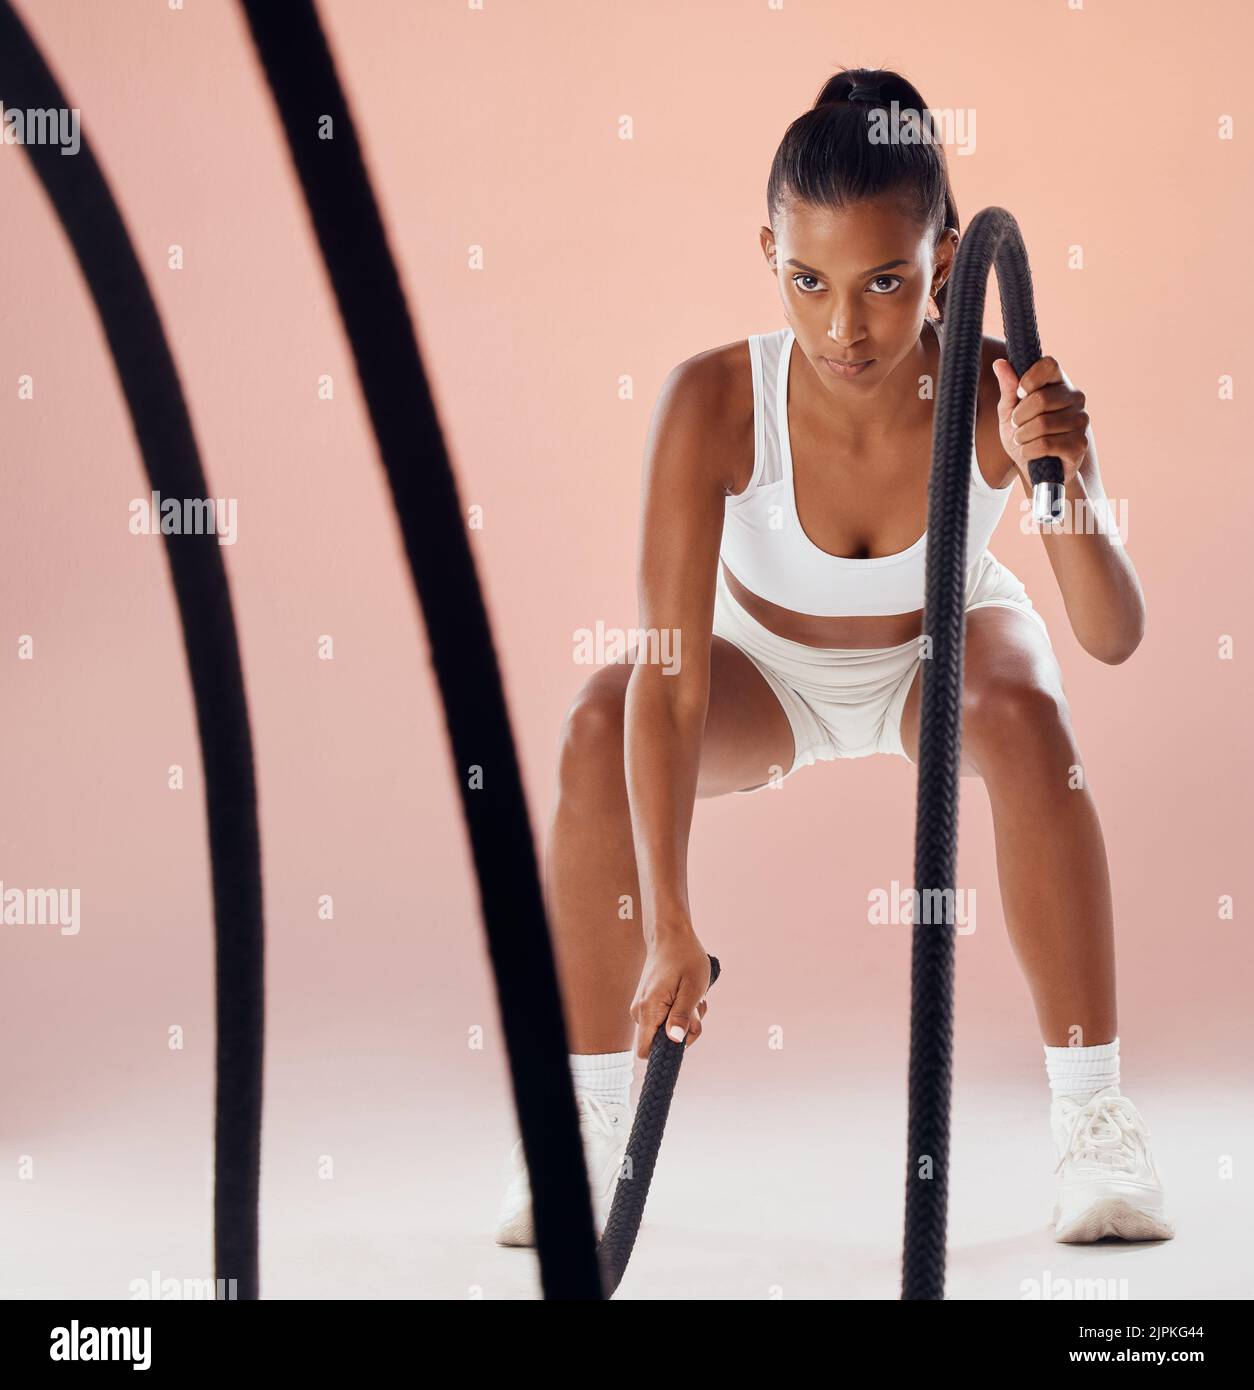 Fitness, battle ropes and active woman in a routine workout, training and exercise against pink studio background. Sporty, athletic and strong athlete Stock Photo